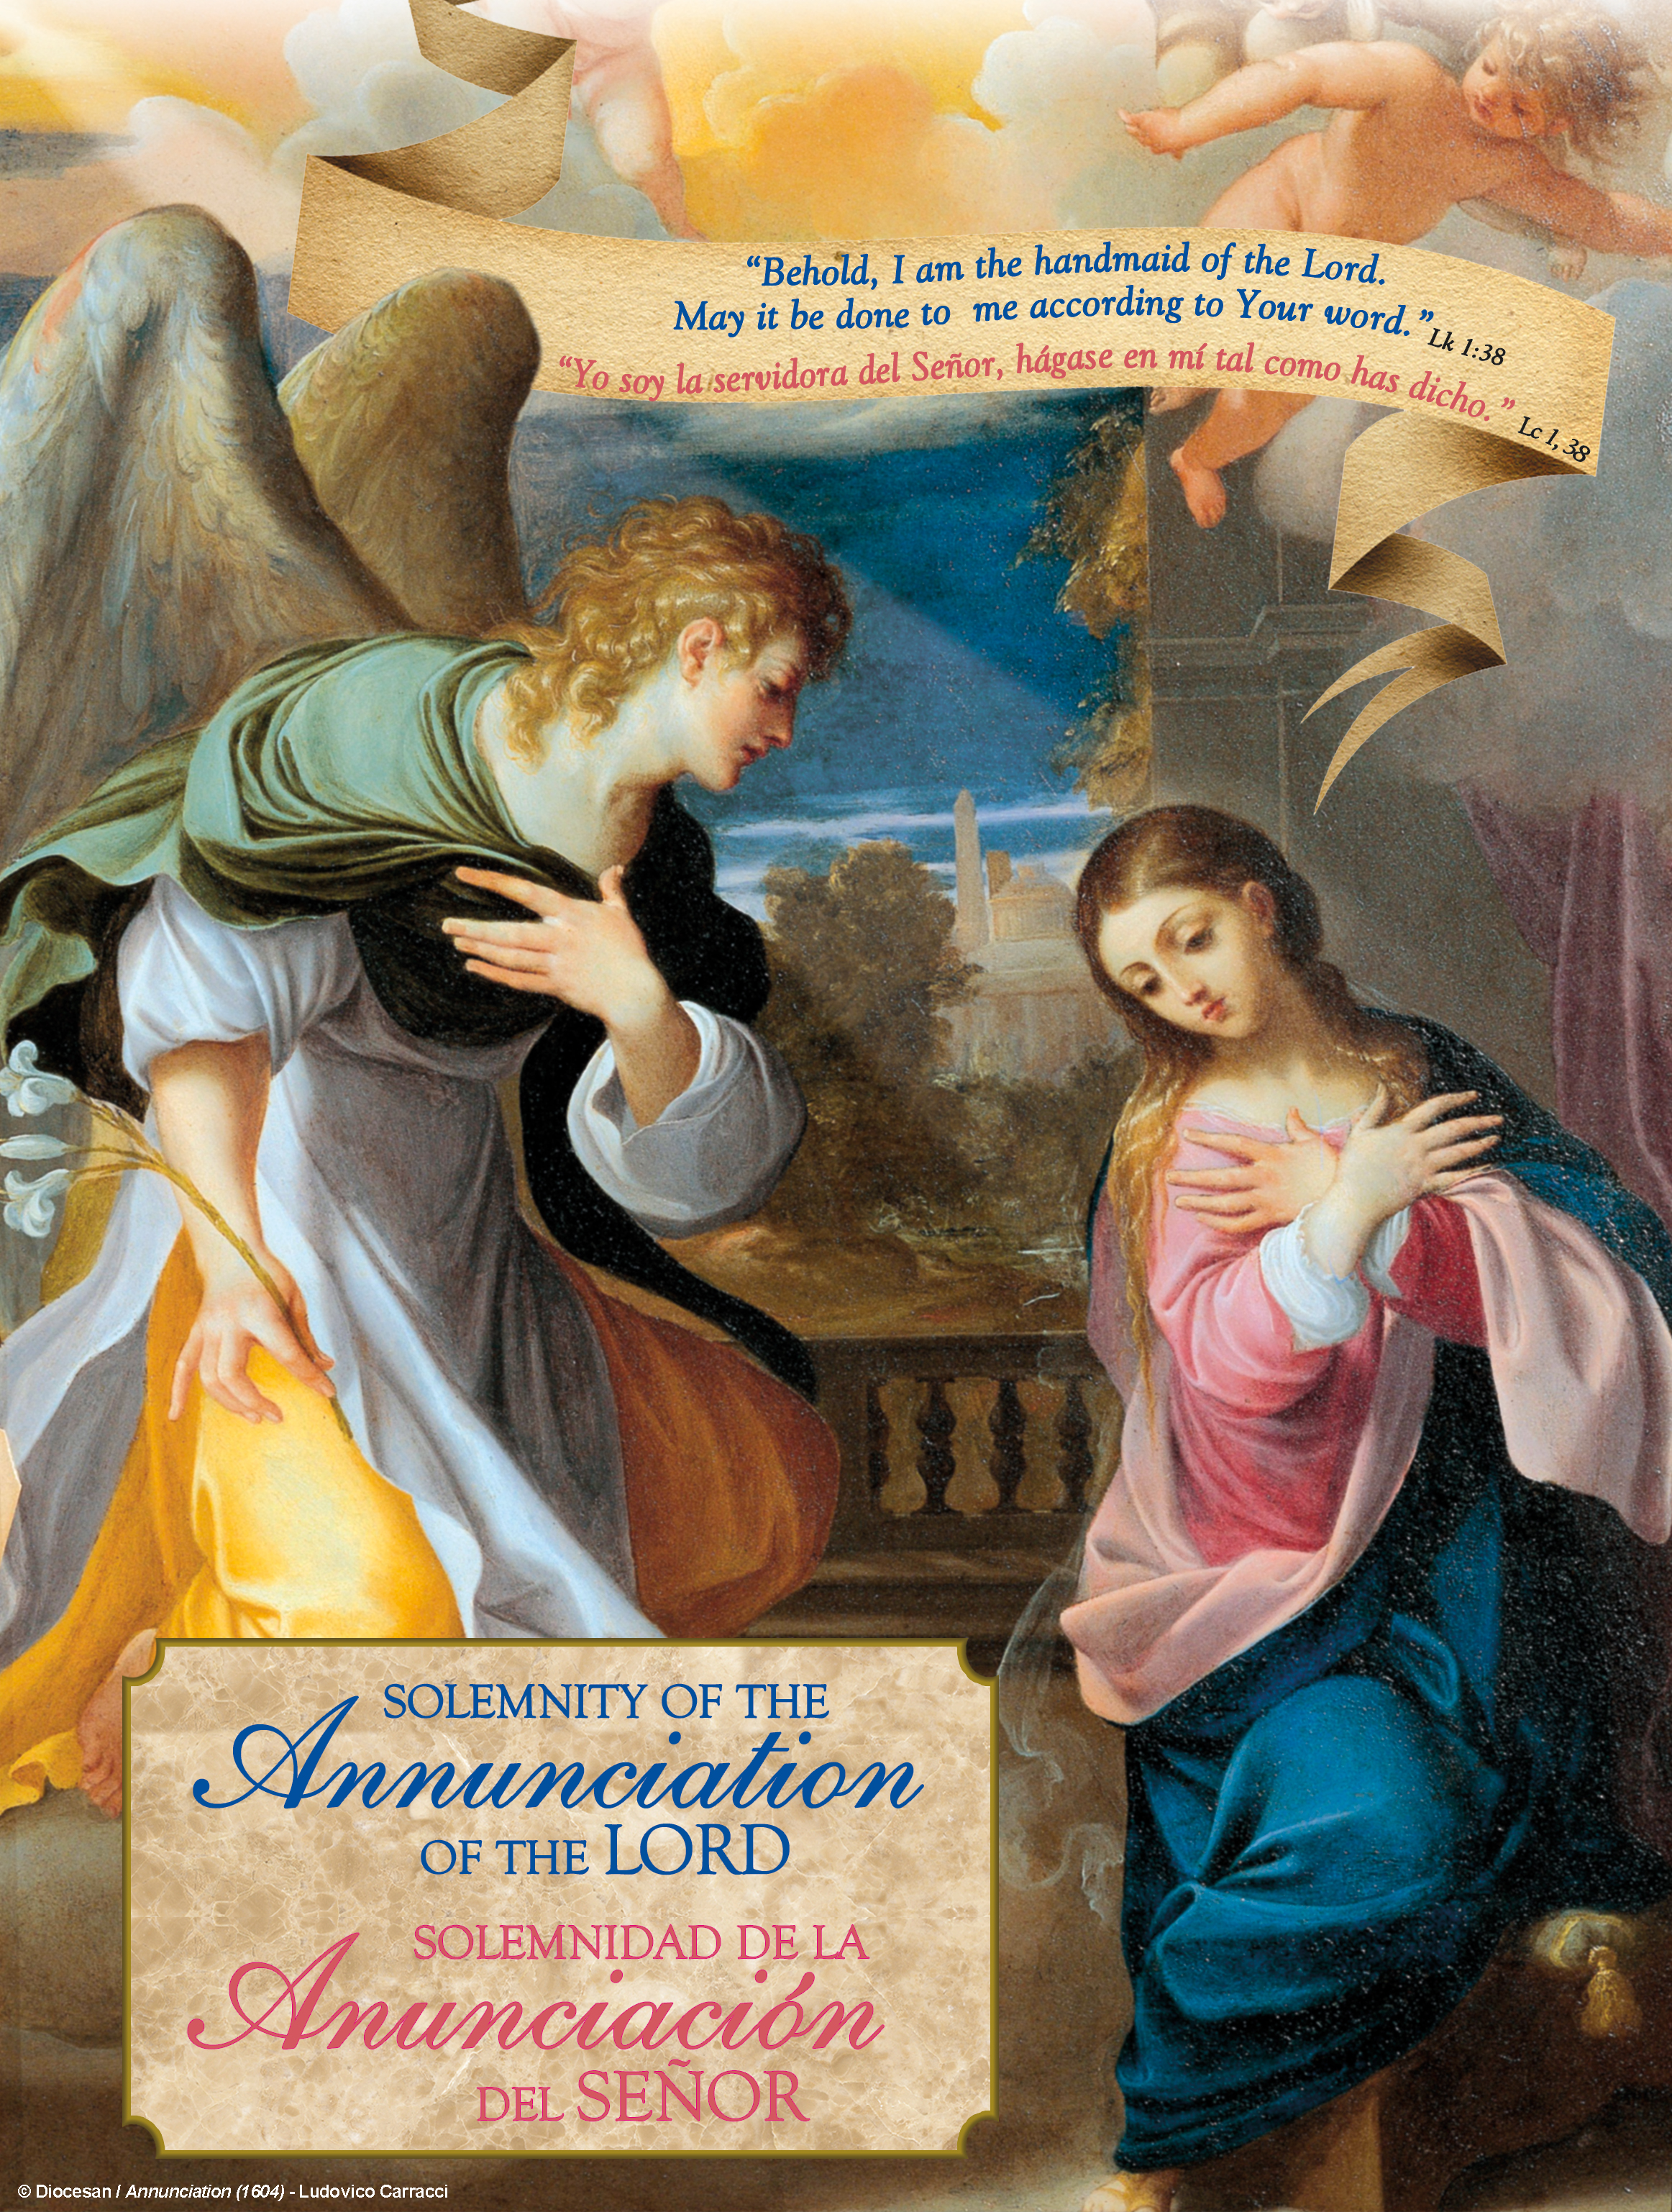 Annunciation - According to Your Word Bilingual